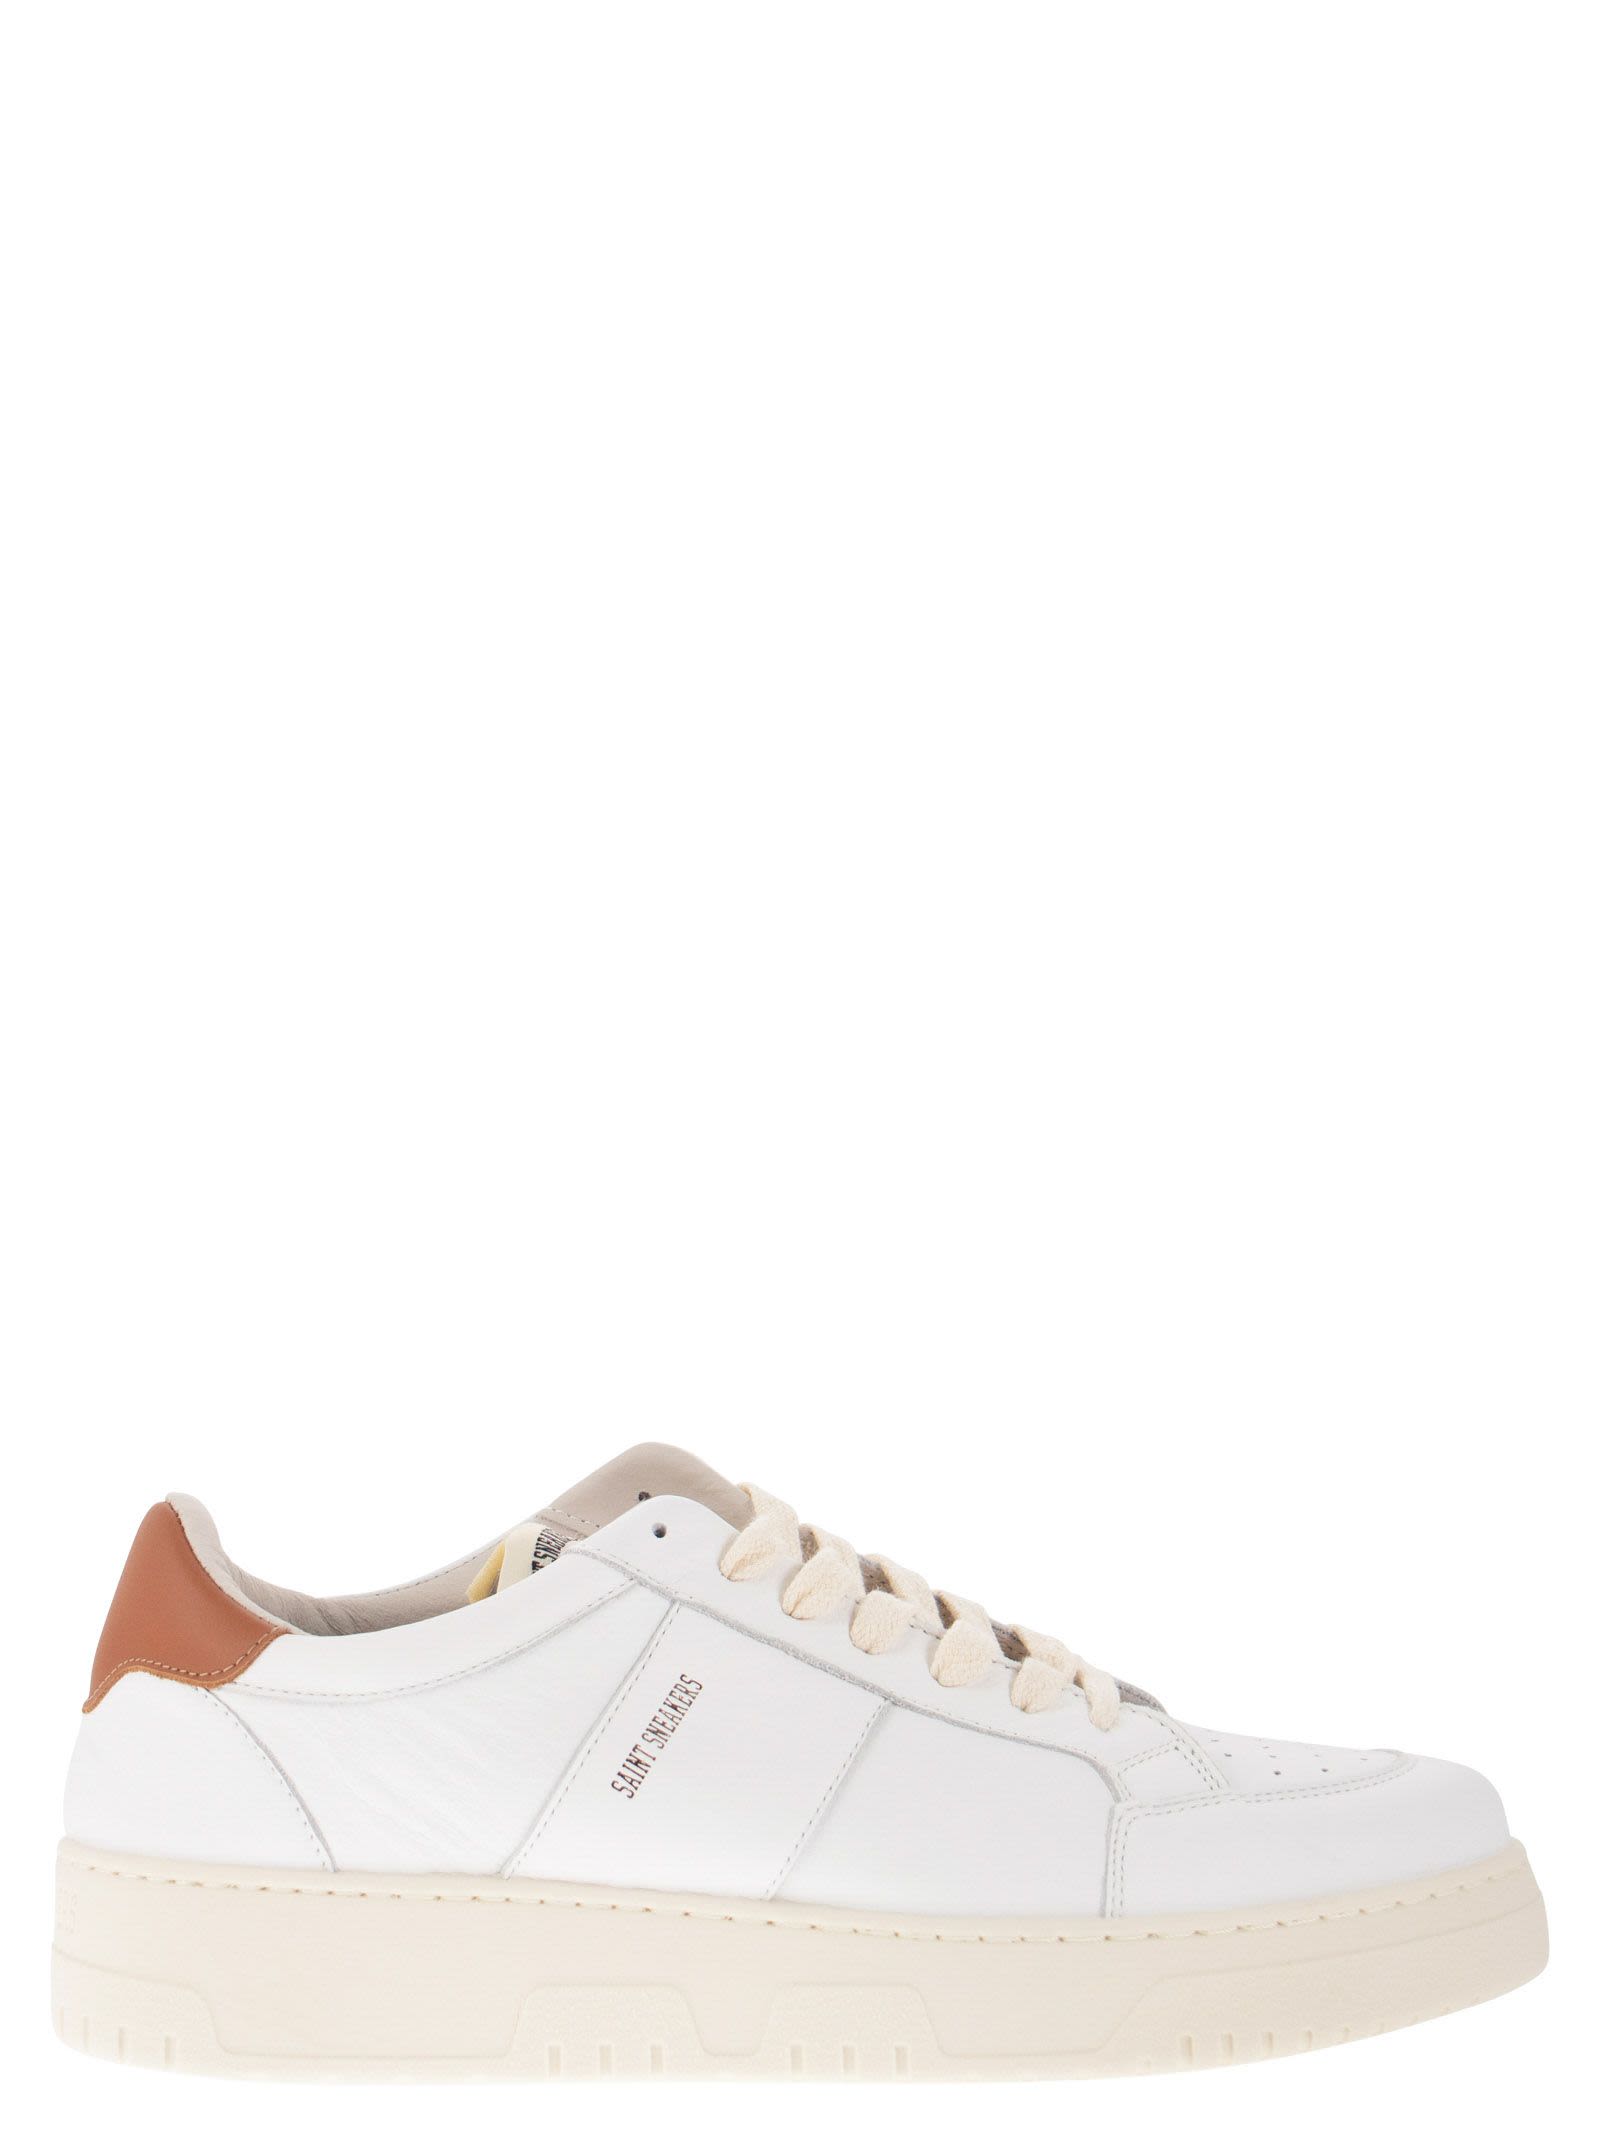 GOLF - White and leather trainers - Bellettini.com